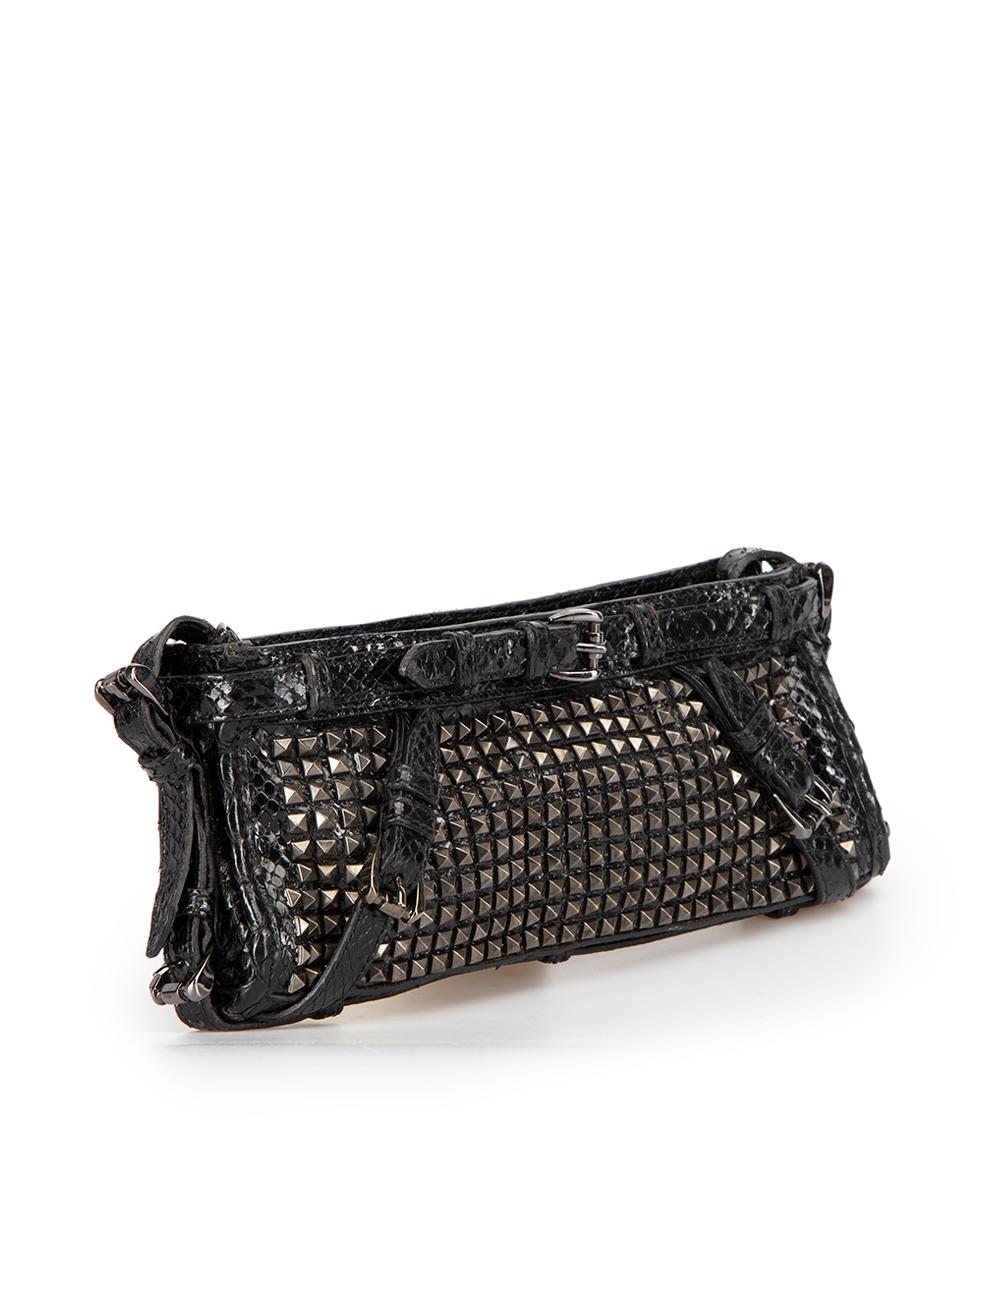 CONDITION is Very good. Minimal wear to clutch bag is evident. Minimal wear to leather with minor tarnishing on hardware on this used Burberry designer resale item.



Details


Black

Python leather

Medium clutch bag

Studded

Decorative